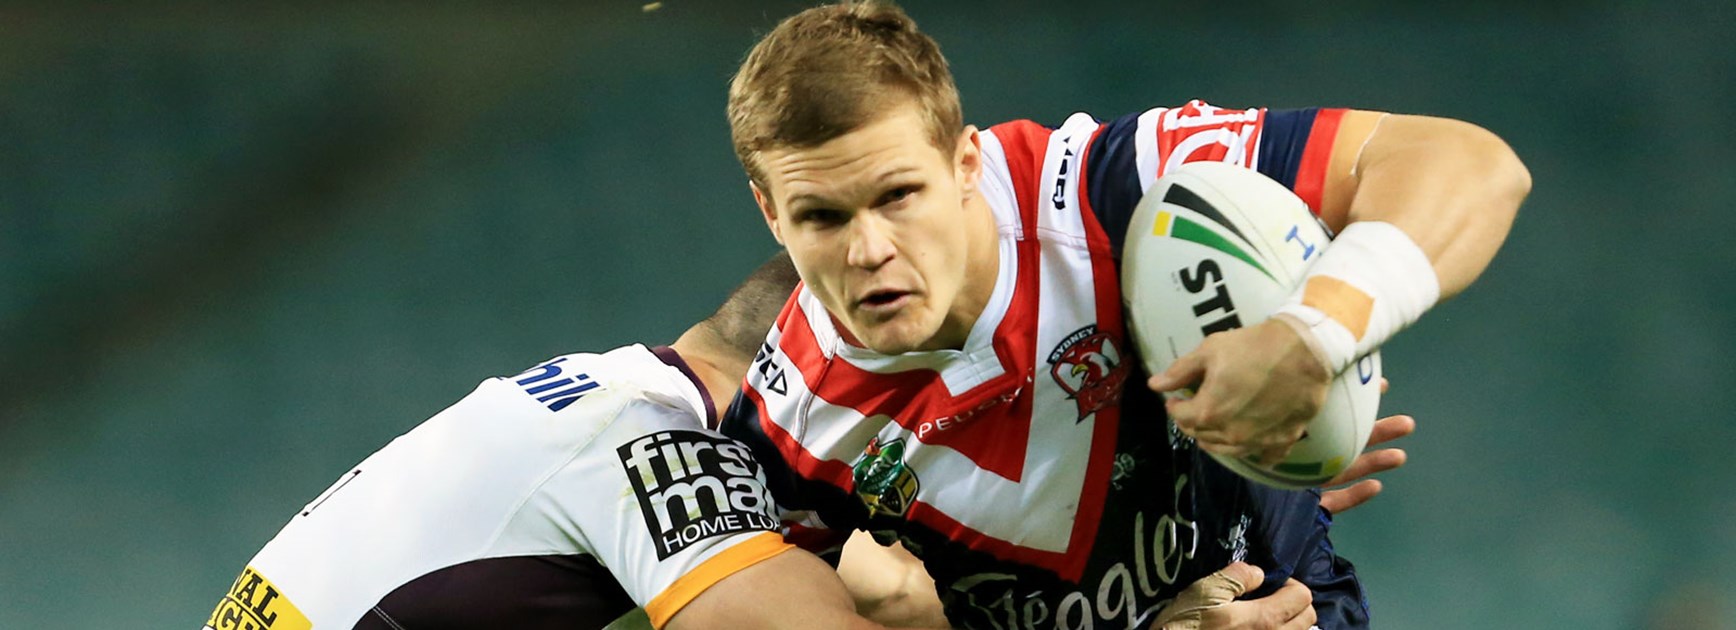 Roosters centre Dale Copley got the better of his former Broncos teammates on Thursday night.